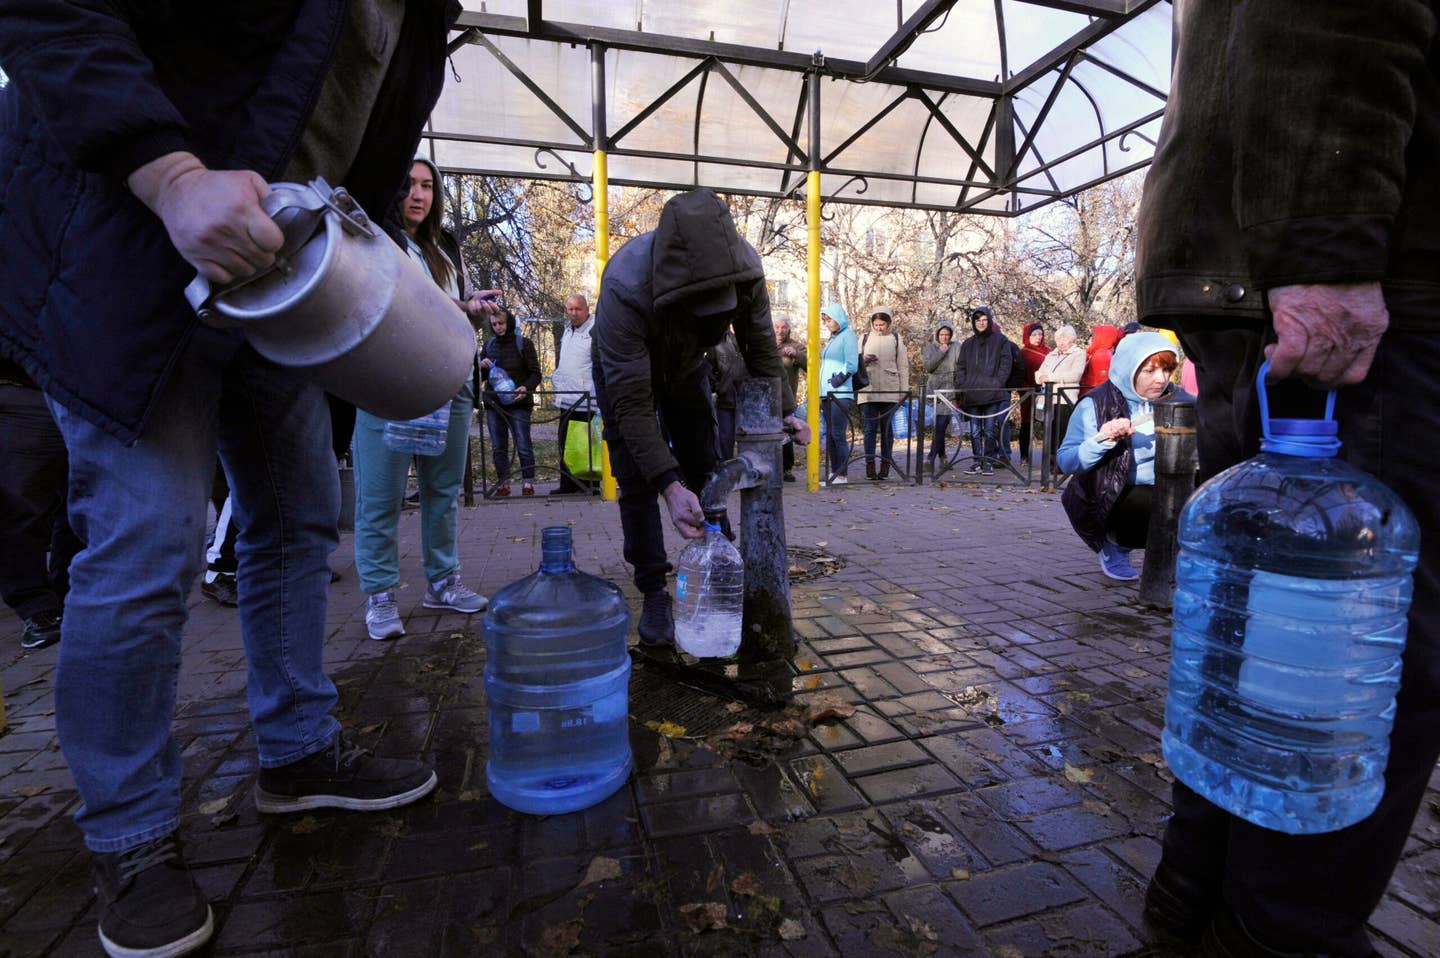 Local residents wait in line to collect water from a public water pump in a Kyiv park on Oct. 31, 2022. (Photo by SERGEI CHUZAVKOV/AFP via Getty Images)